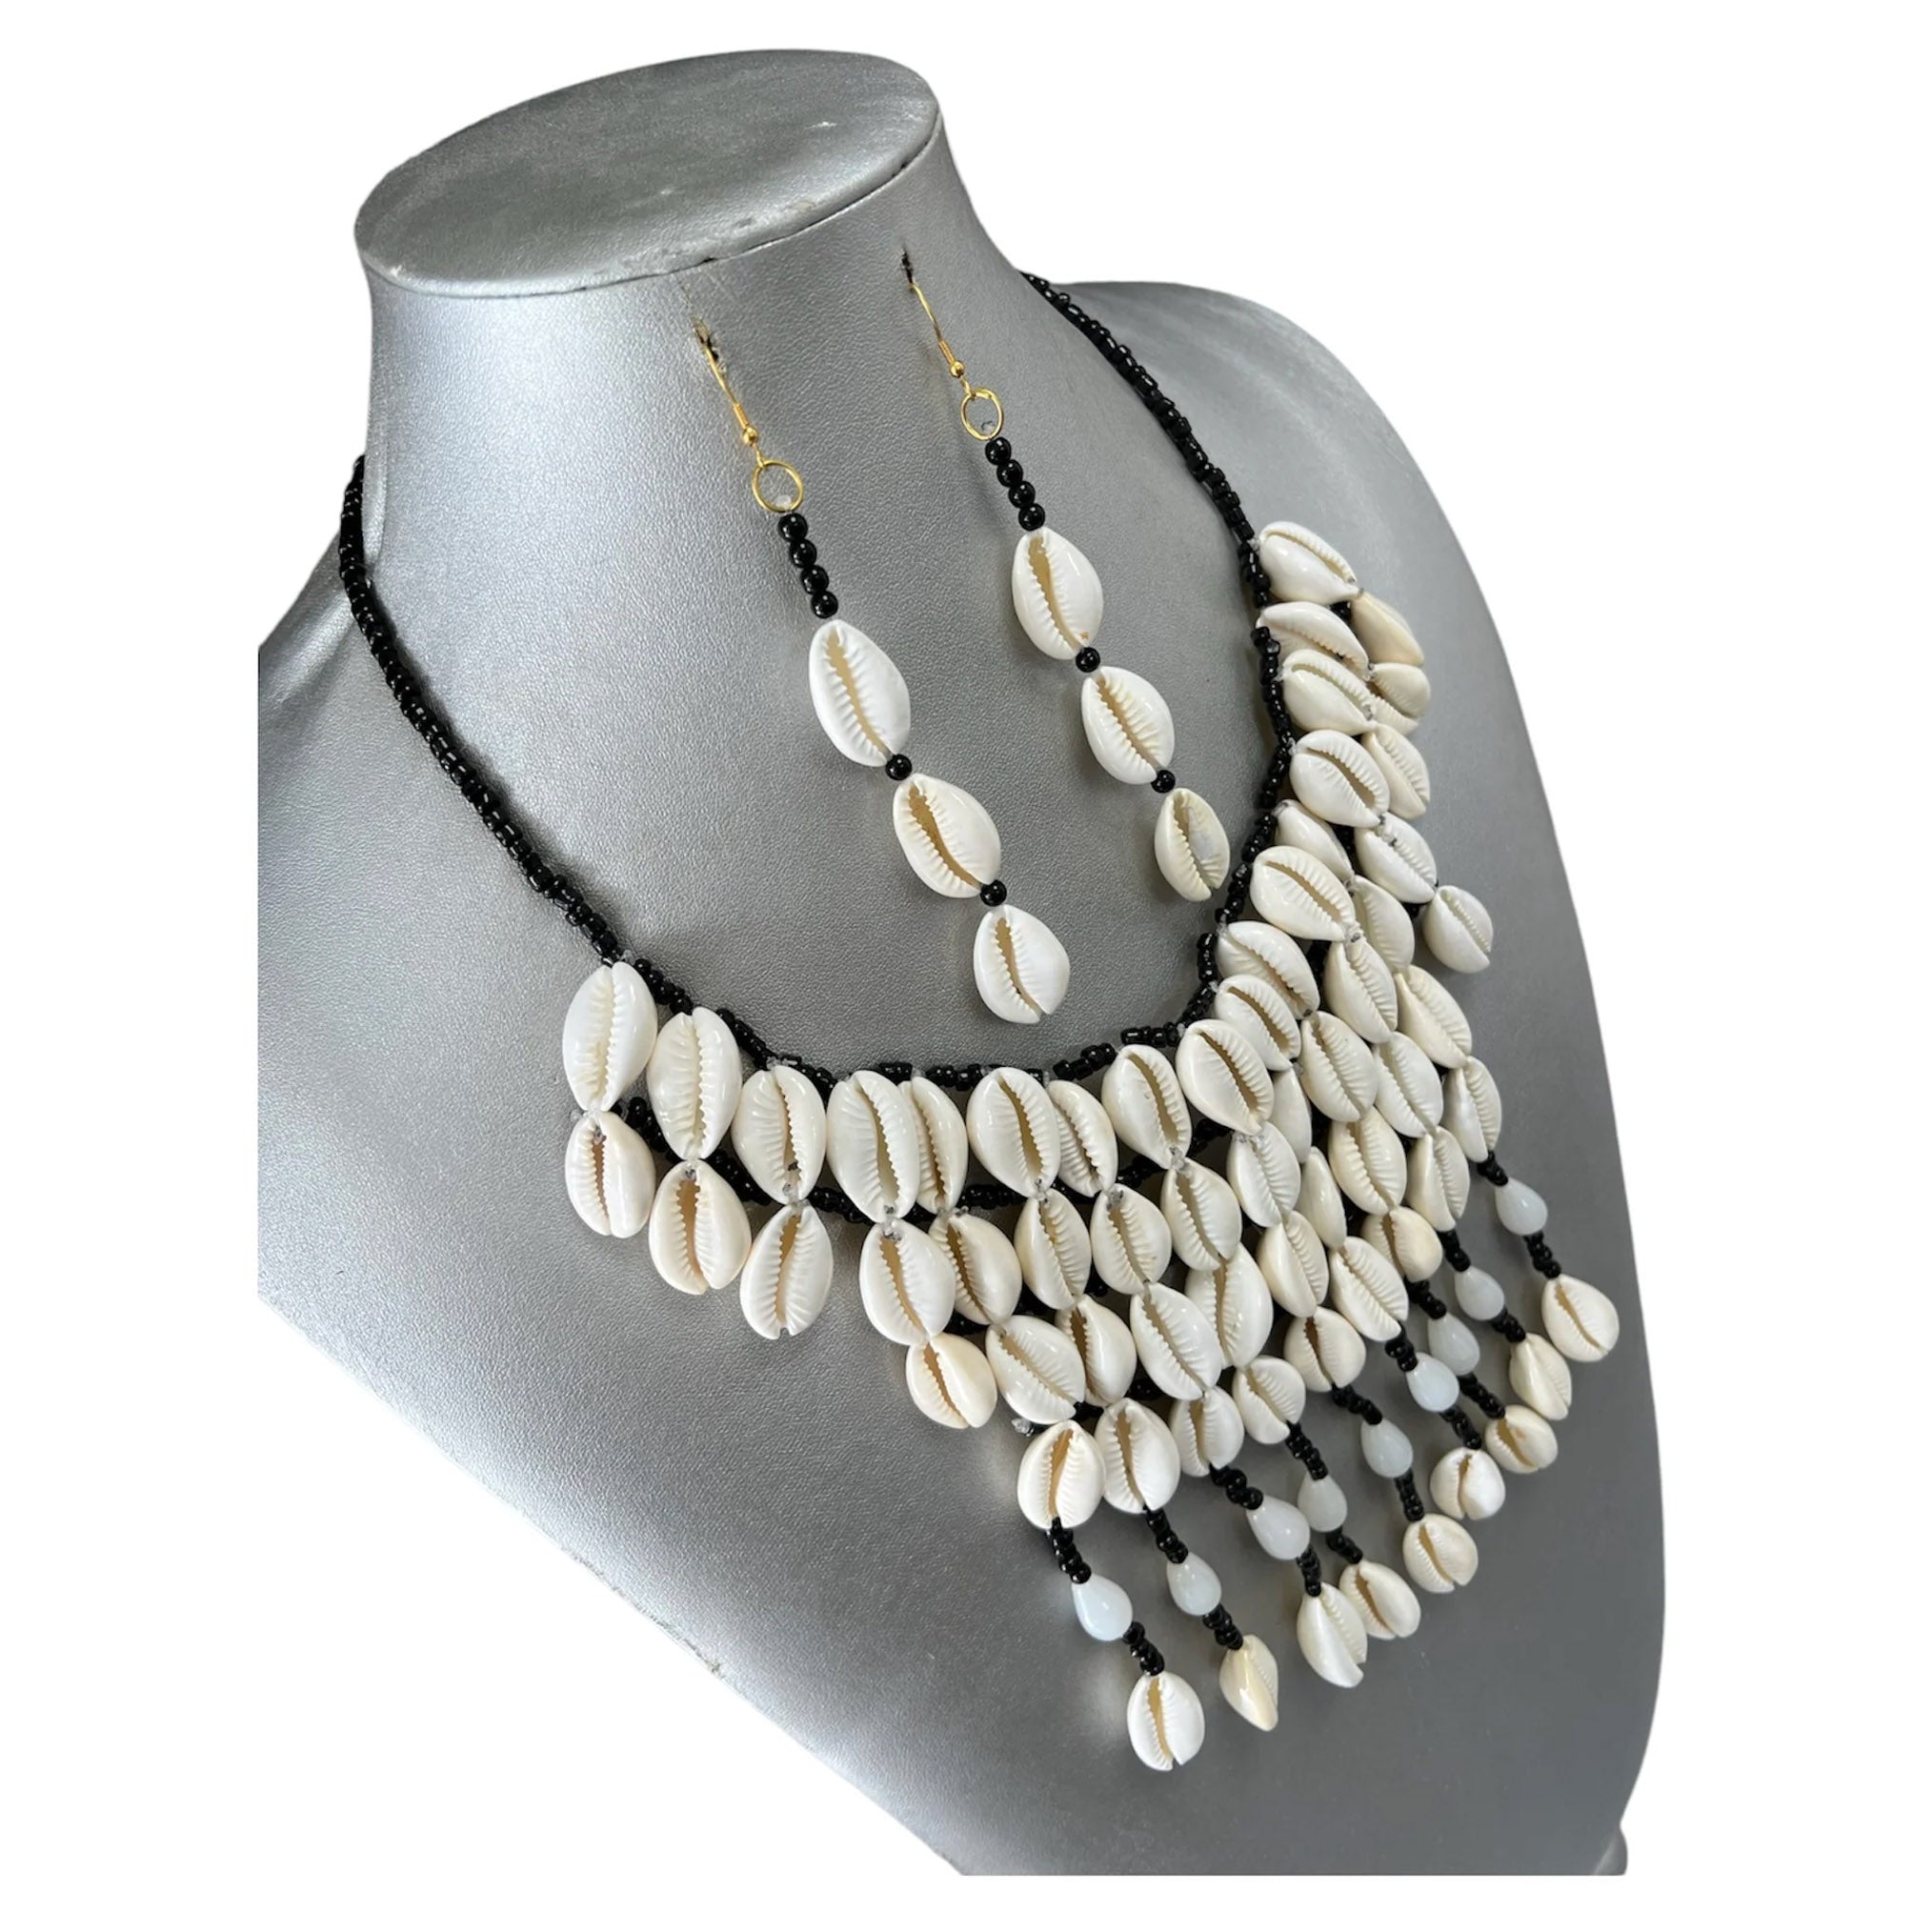 Women's Cowrie Shell Necklace Set with Earrings